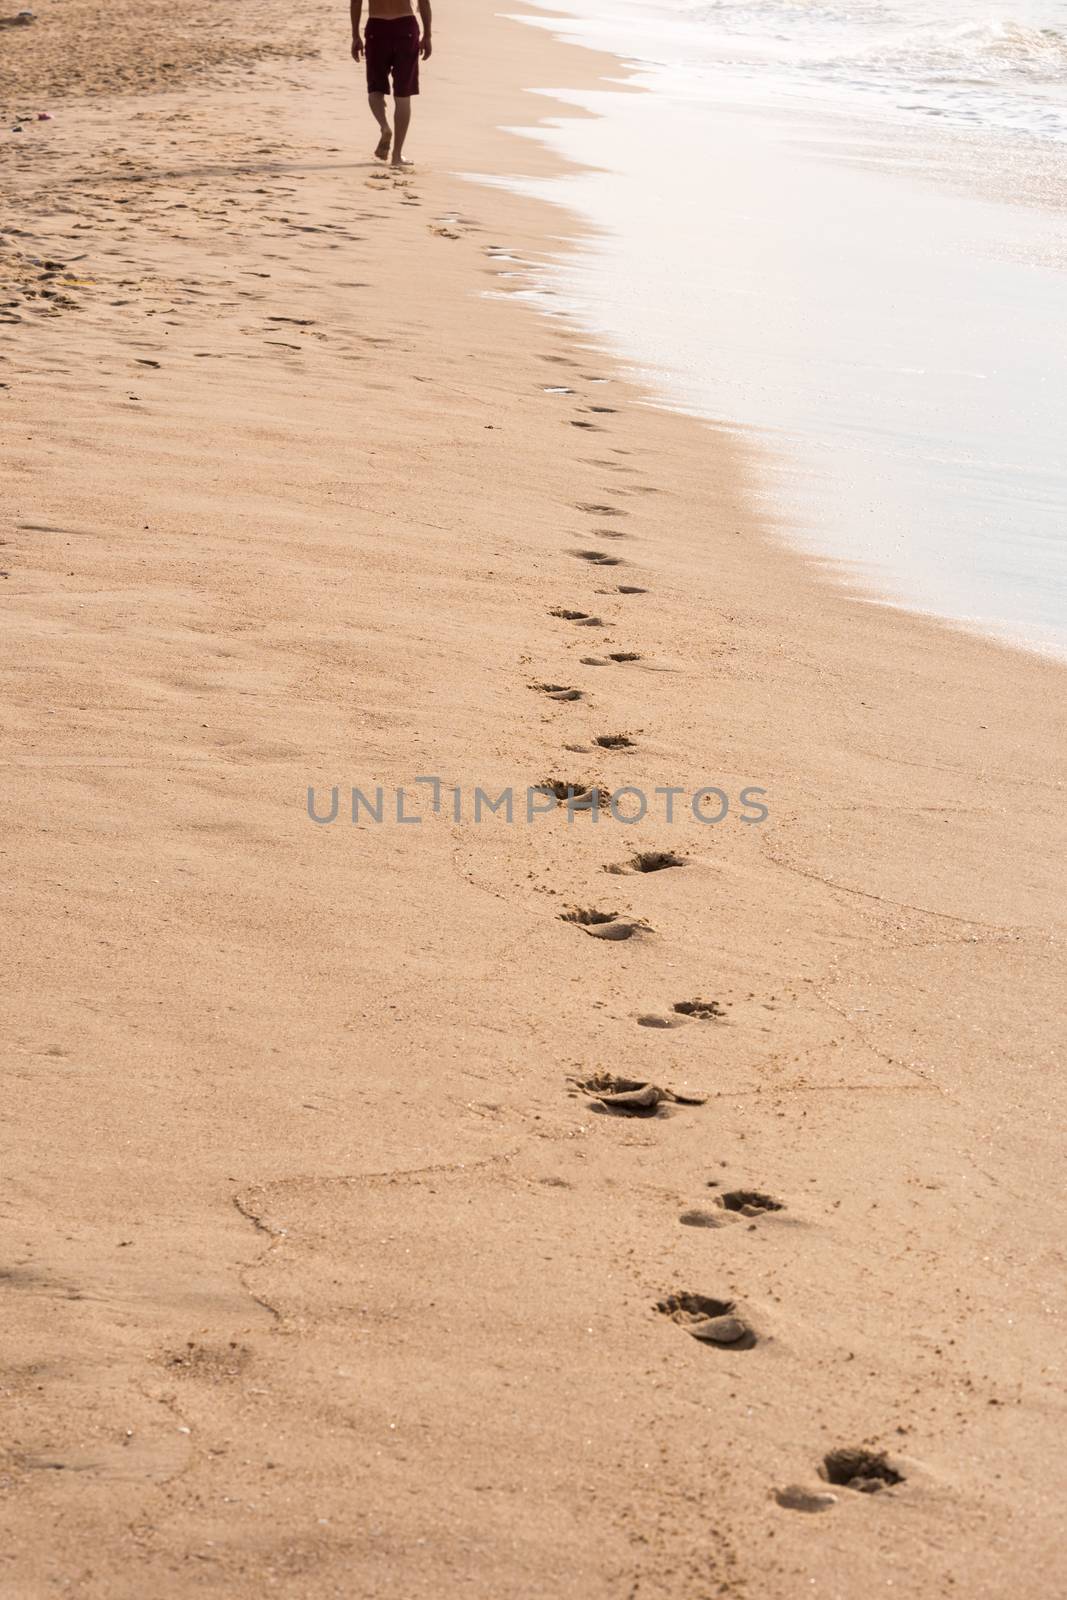 Footprints of a man walking on the beach. Travel concept by ronnarong